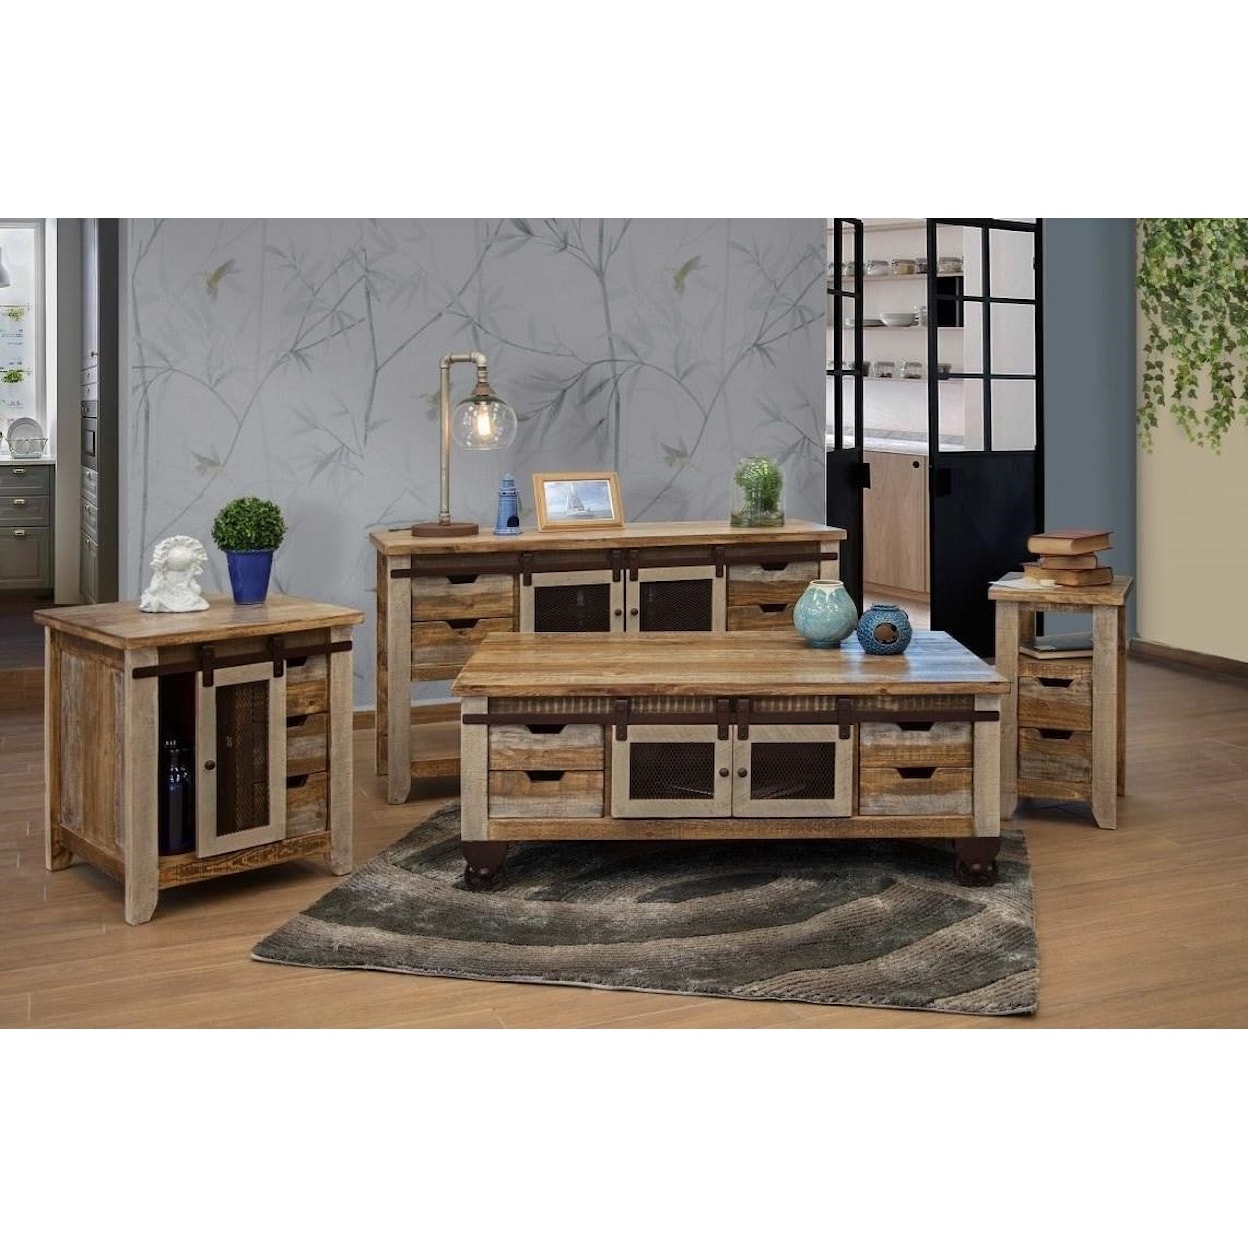 VFM Signature 900 Antique Sofa Table with 2 Doors and 4 Drawers